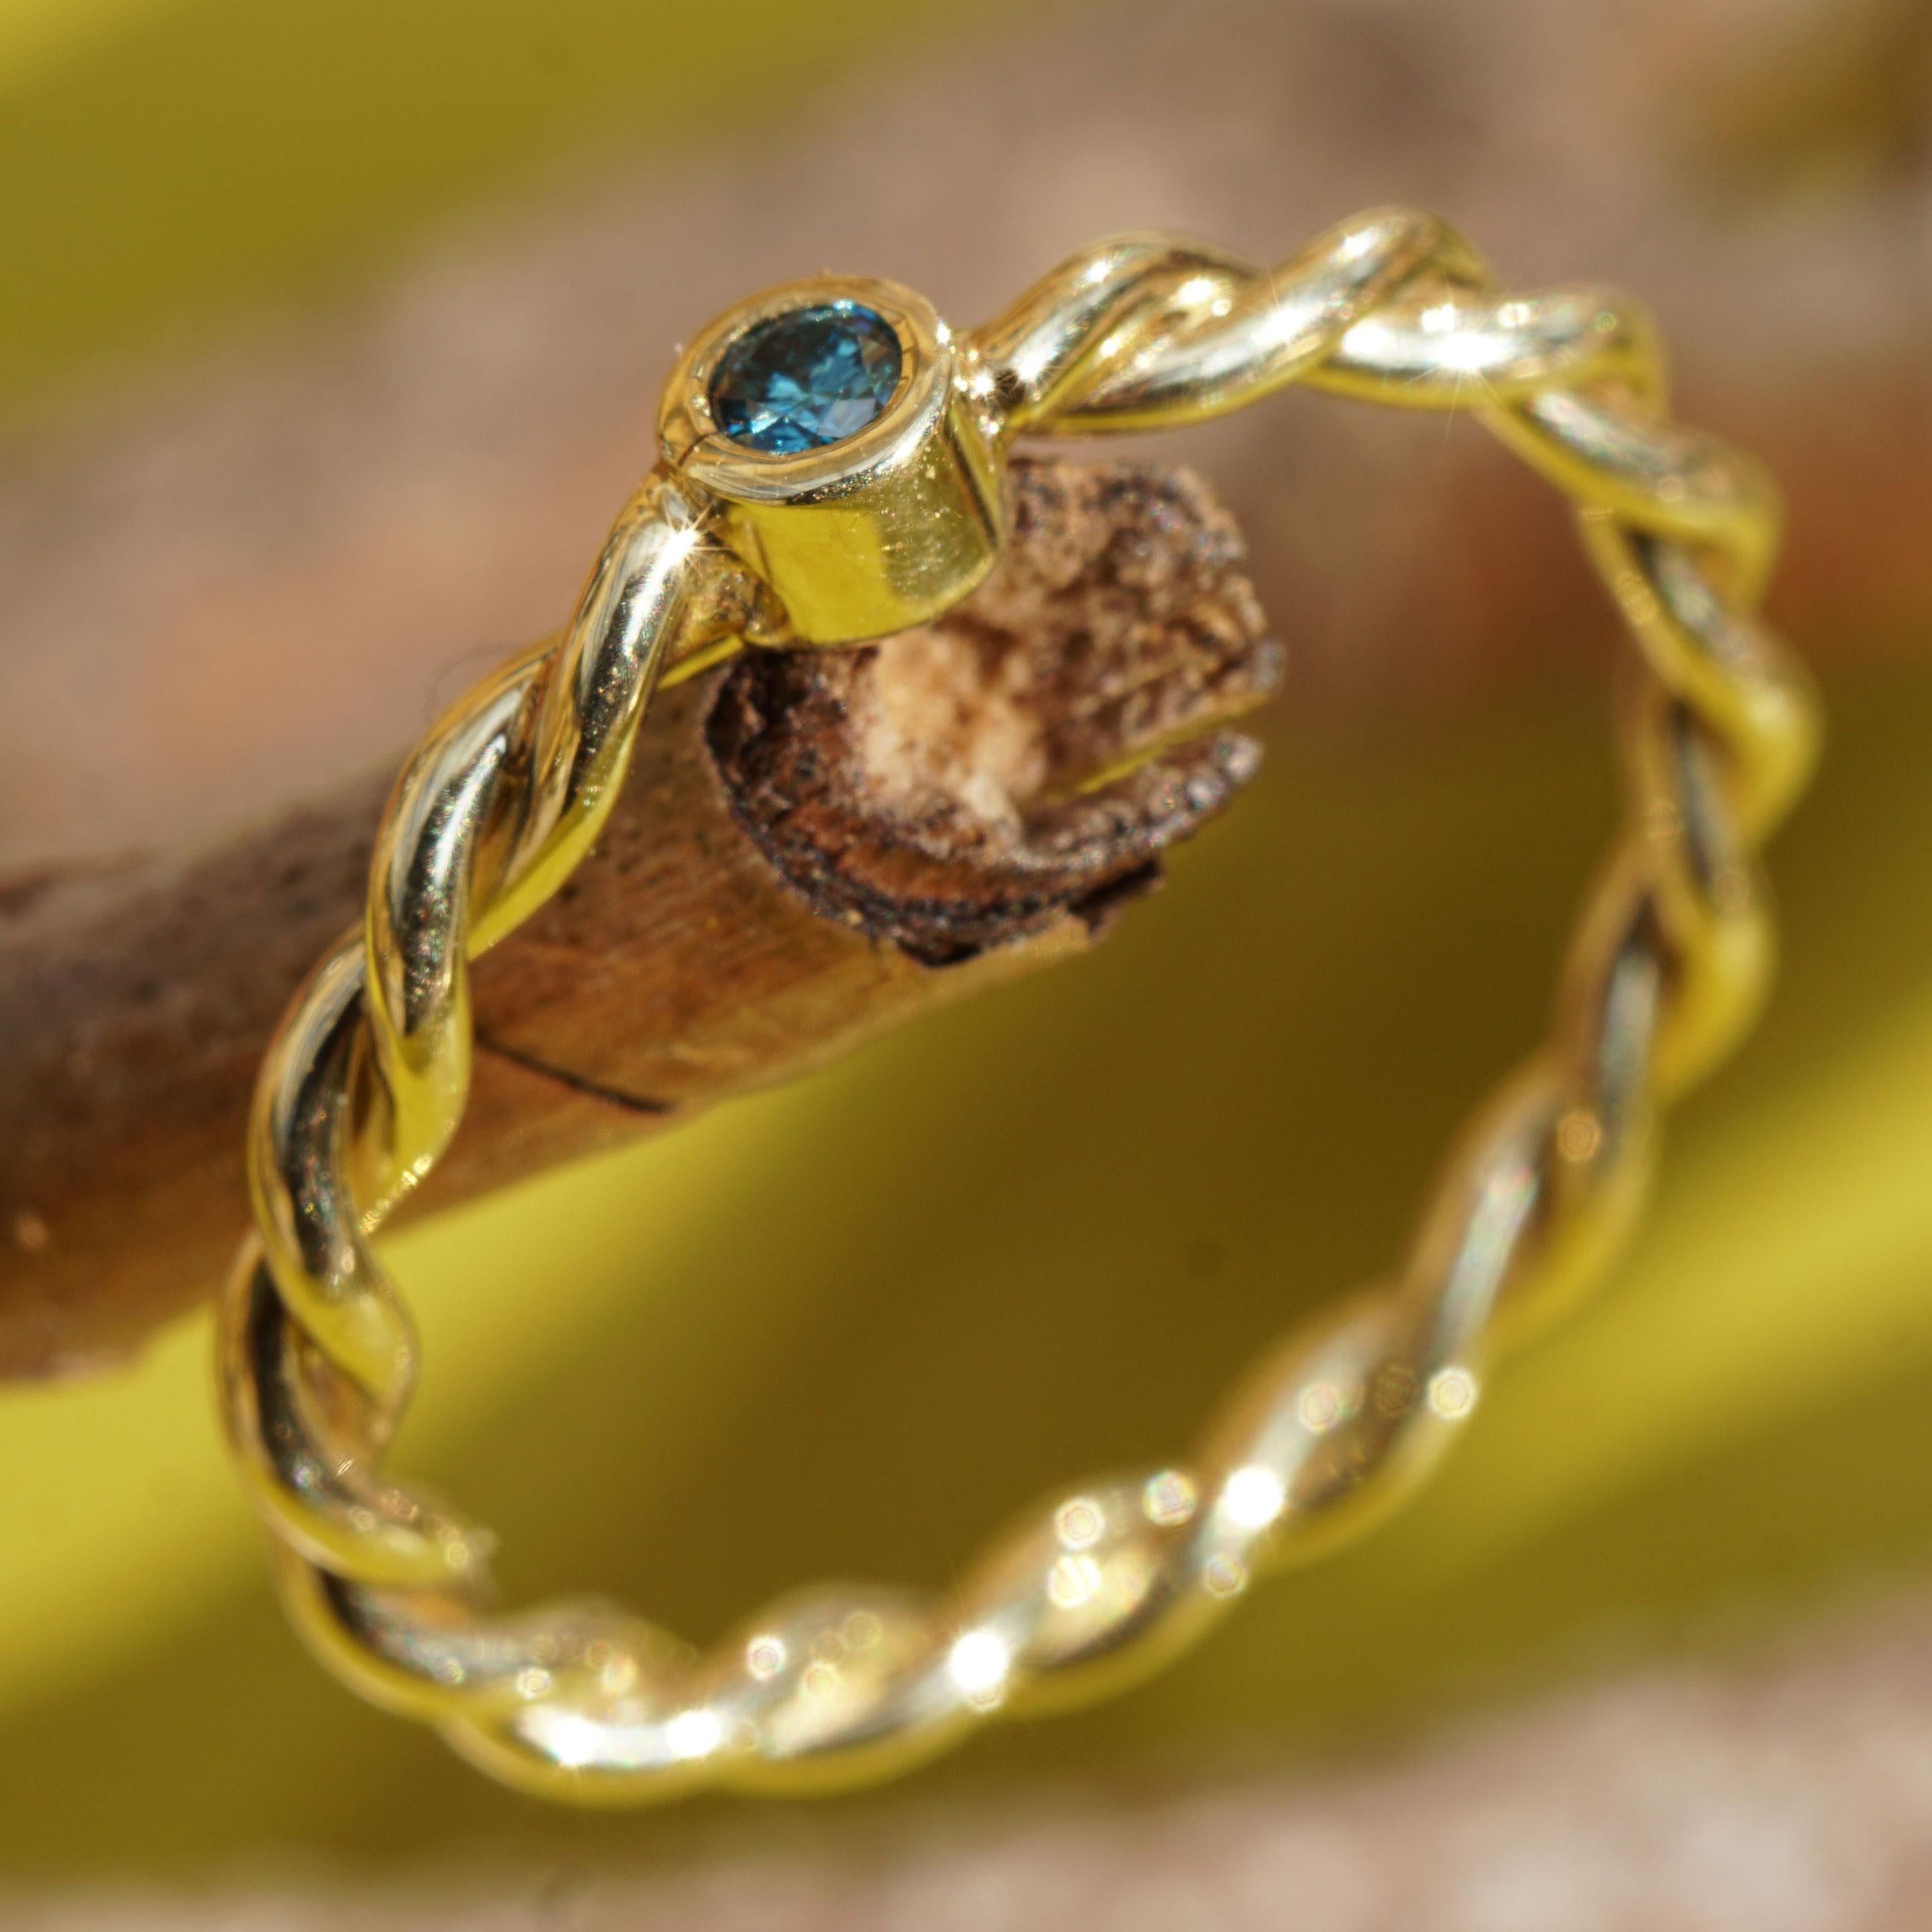 Diamond Rope Ring with Magic Blue Diamond Goldsmith Workmanship Bridal Ring In New Condition For Sale In Viena, Viena